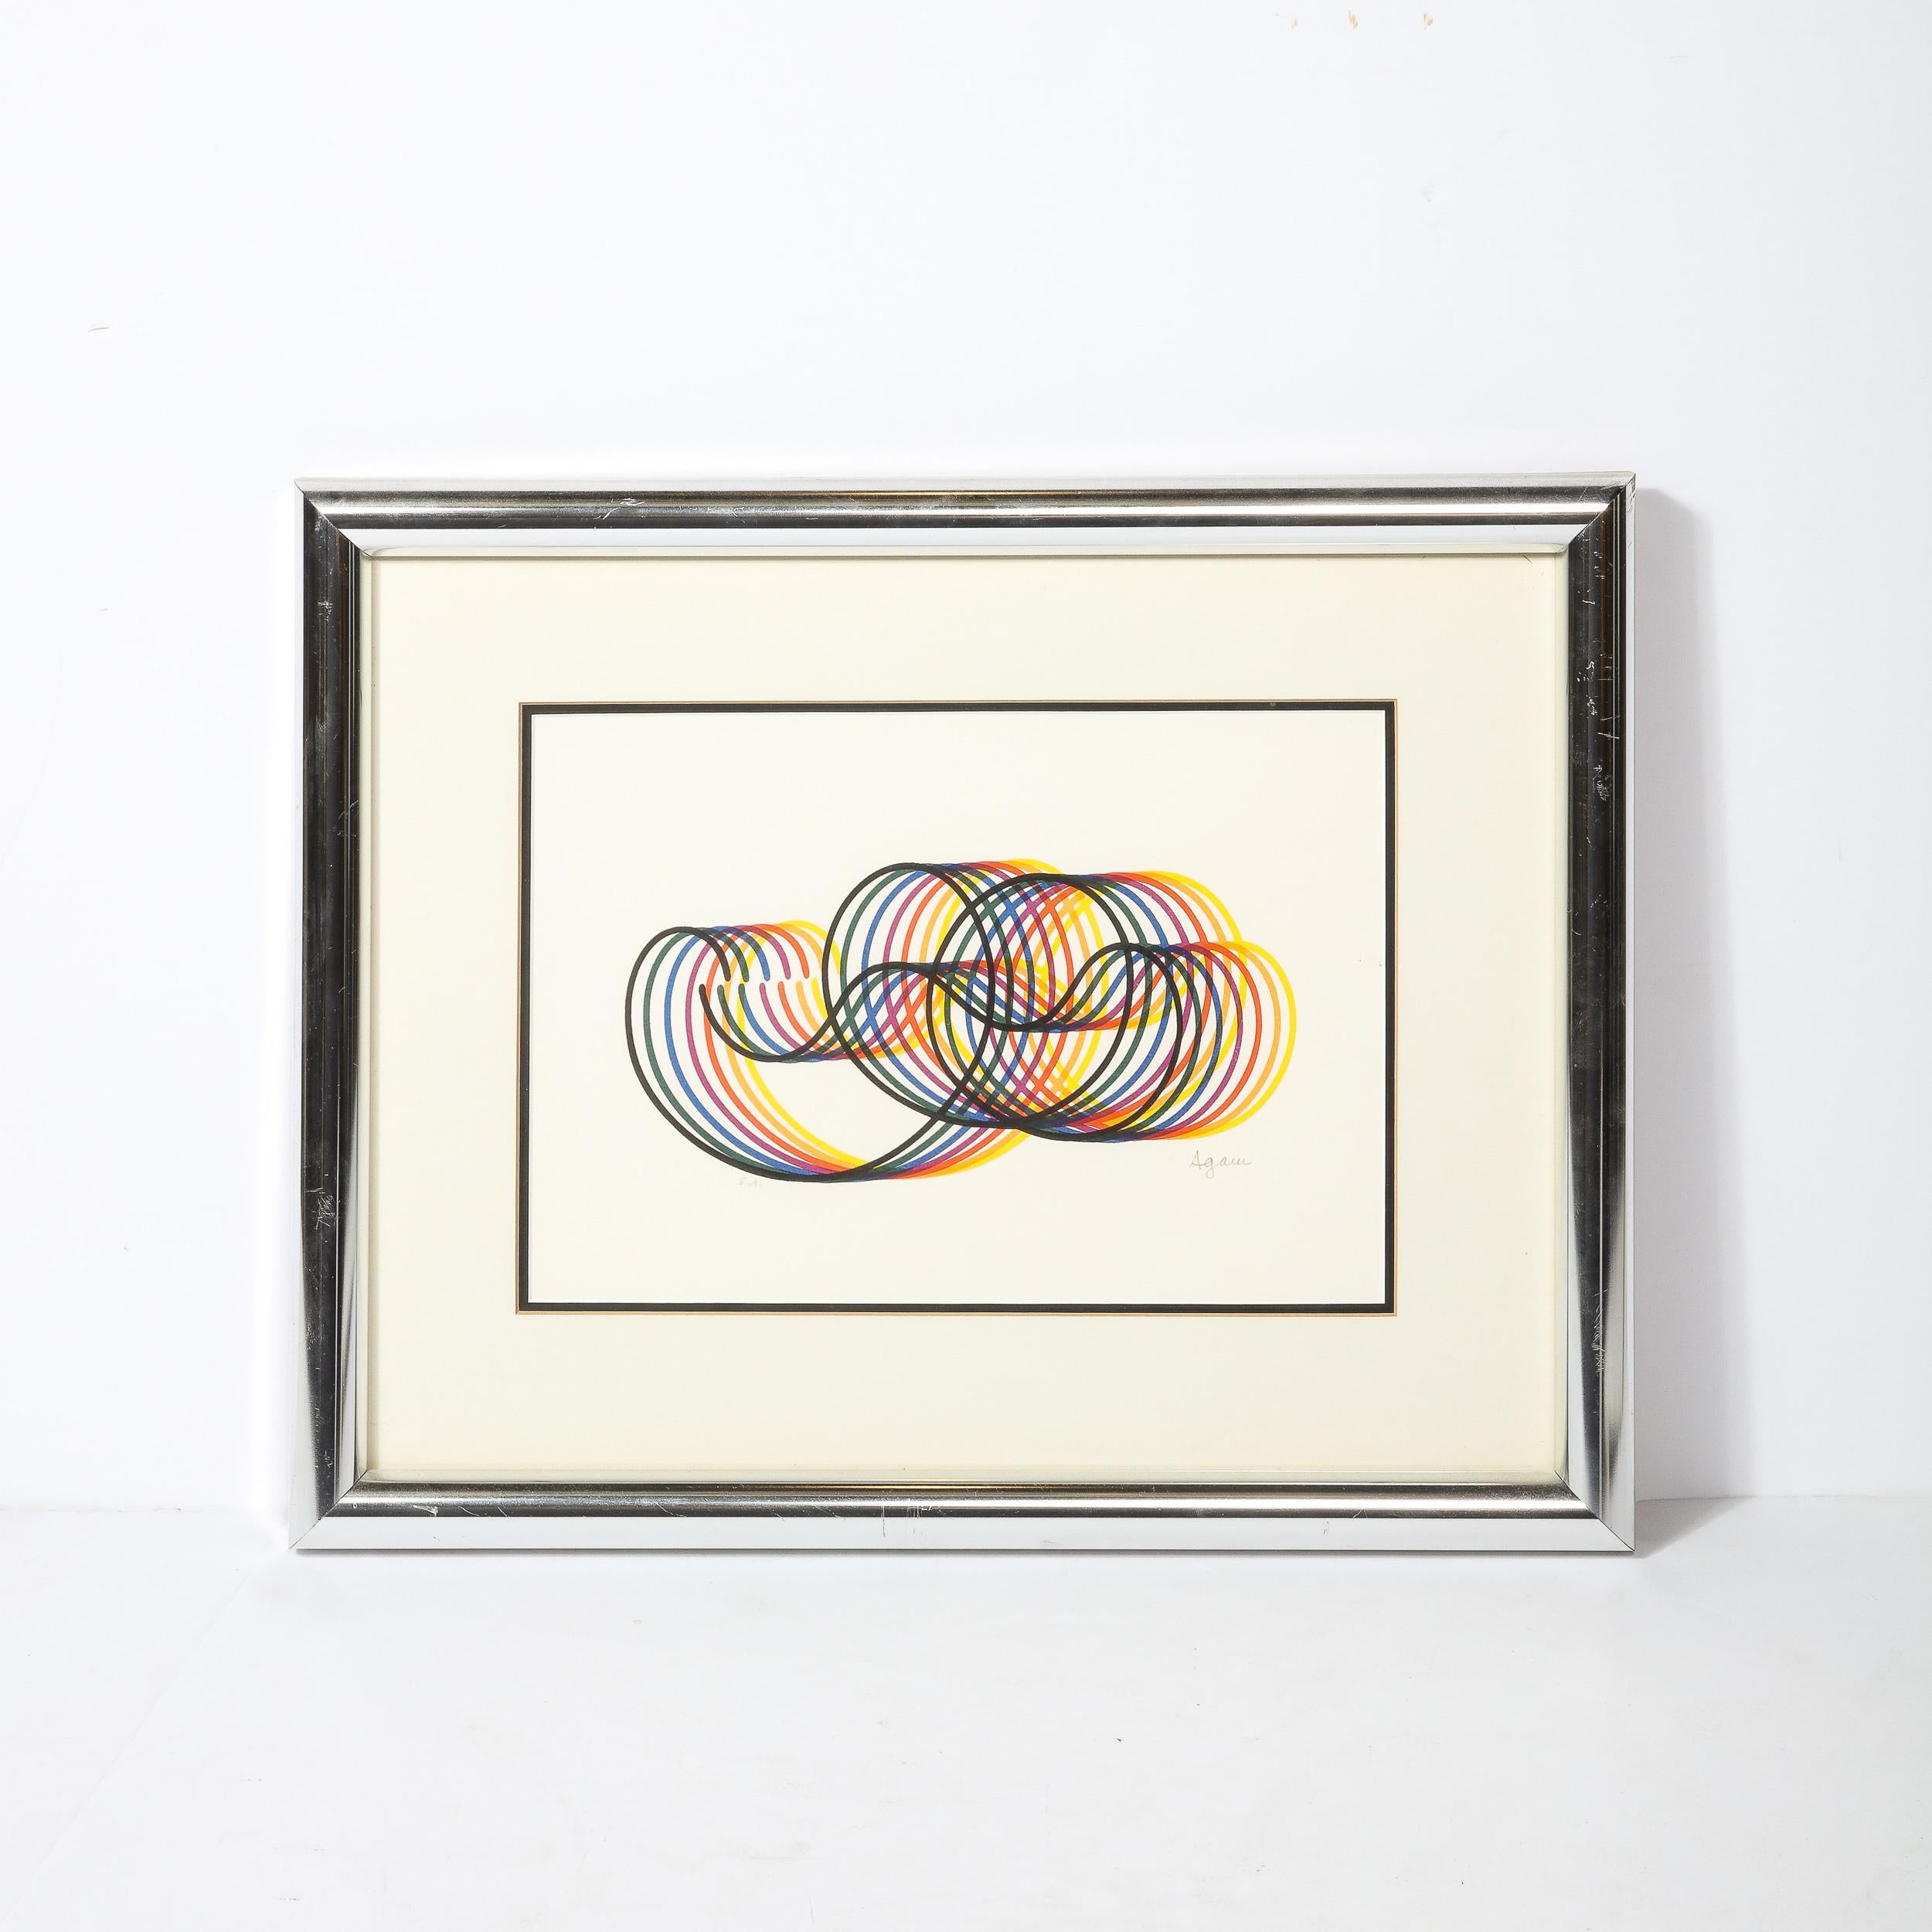 Modernist Abstract Lithograph w/ Multicolor Looping Line Work signed Yaakov Agam - Art by Unknown